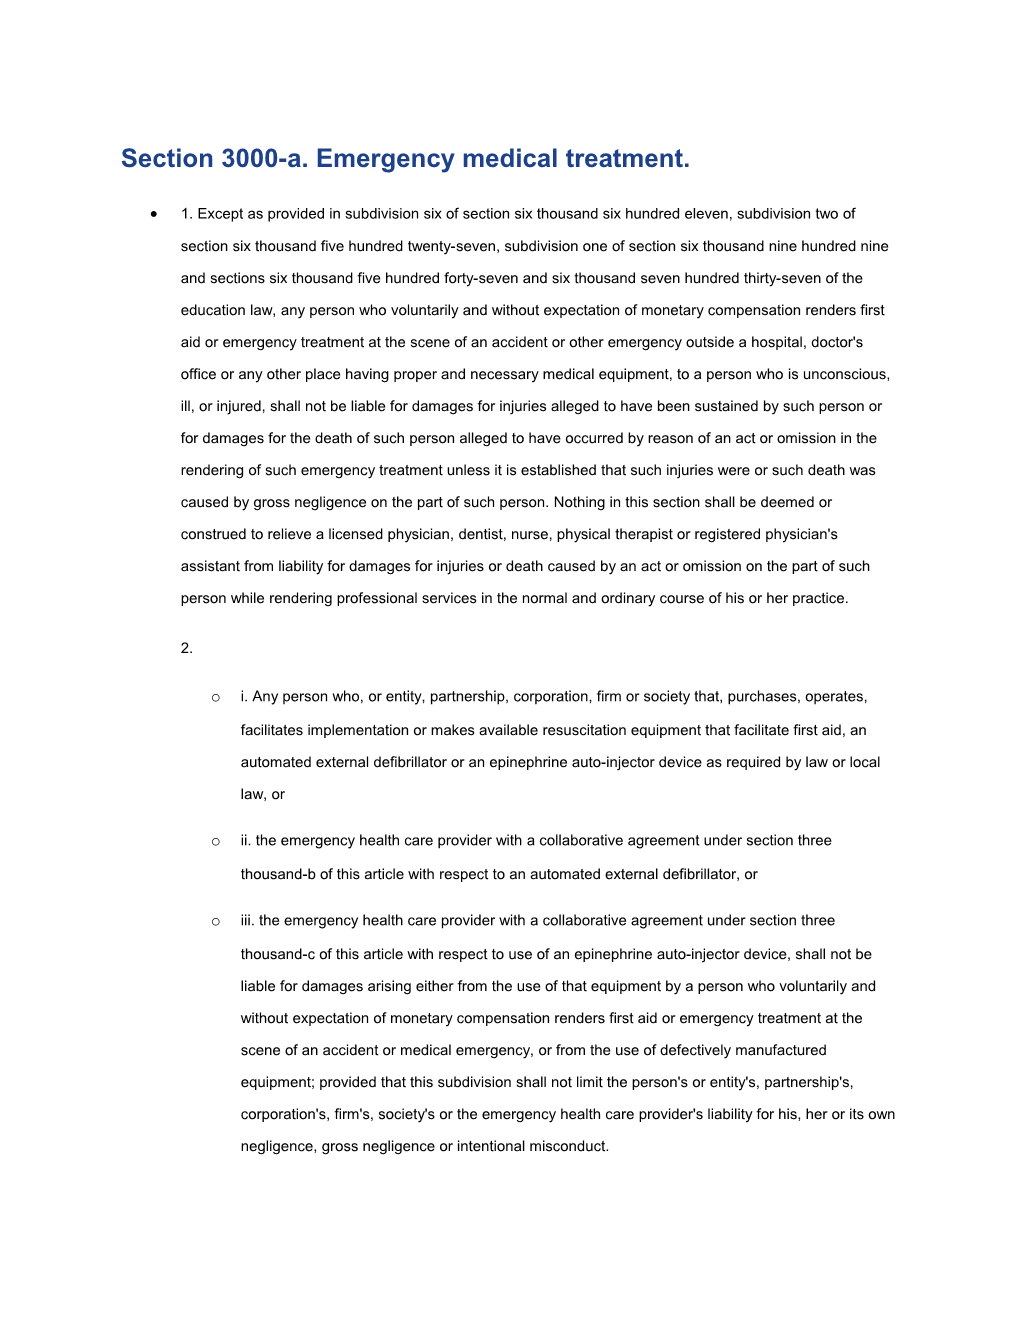 Section 3000-A. Emergency Medical Treatment